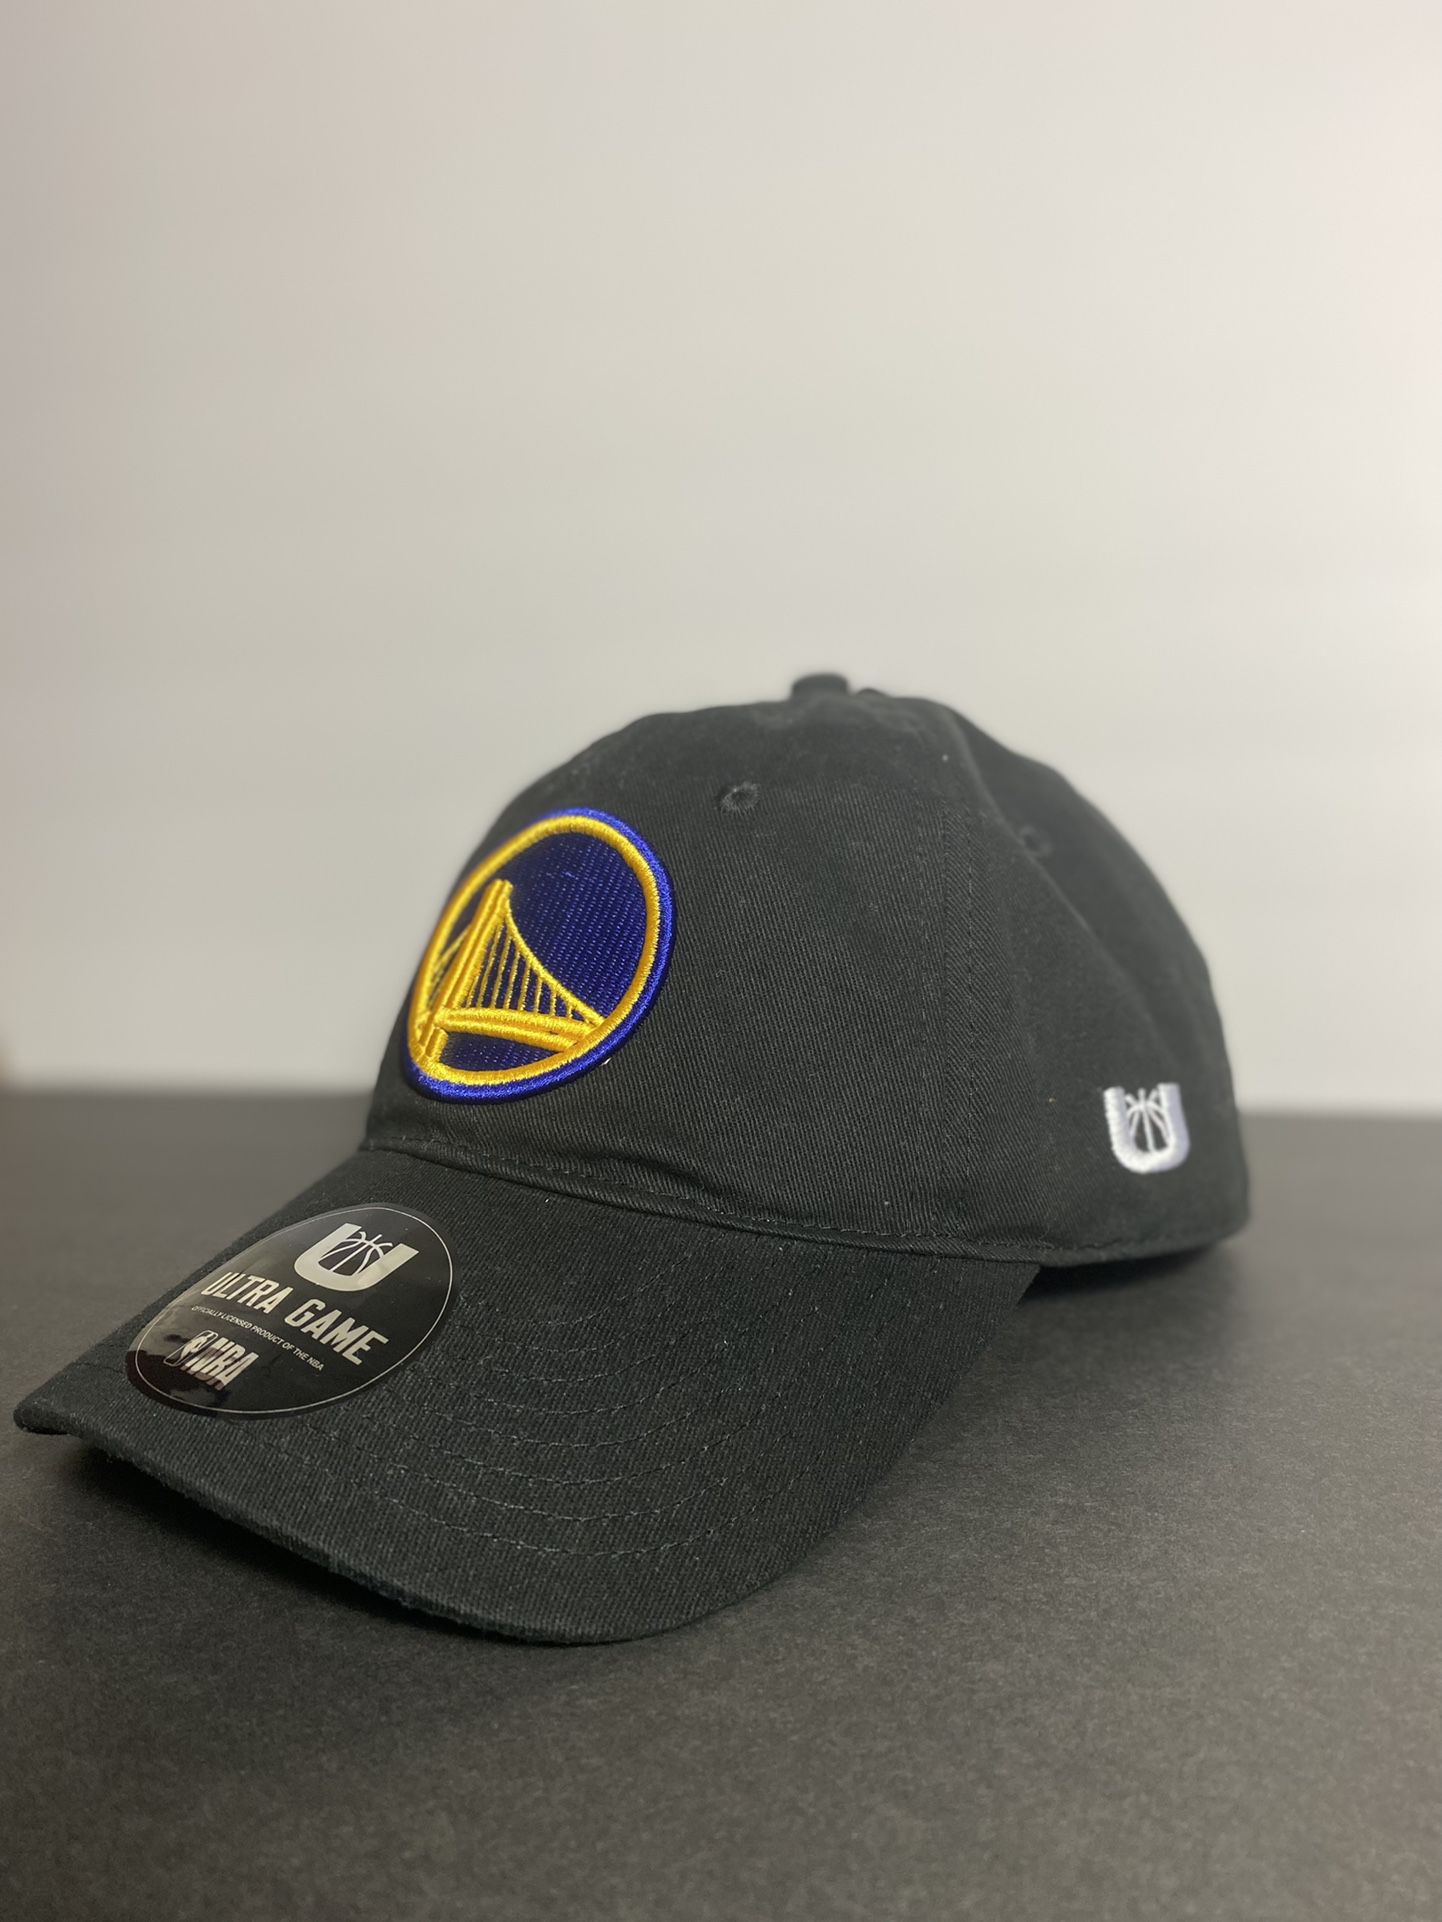 LIMITED EDITION Ultra Game Golden State Warriors Basketball Snapback Hat  New, NBA for Sale in Katy, TX - OfferUp